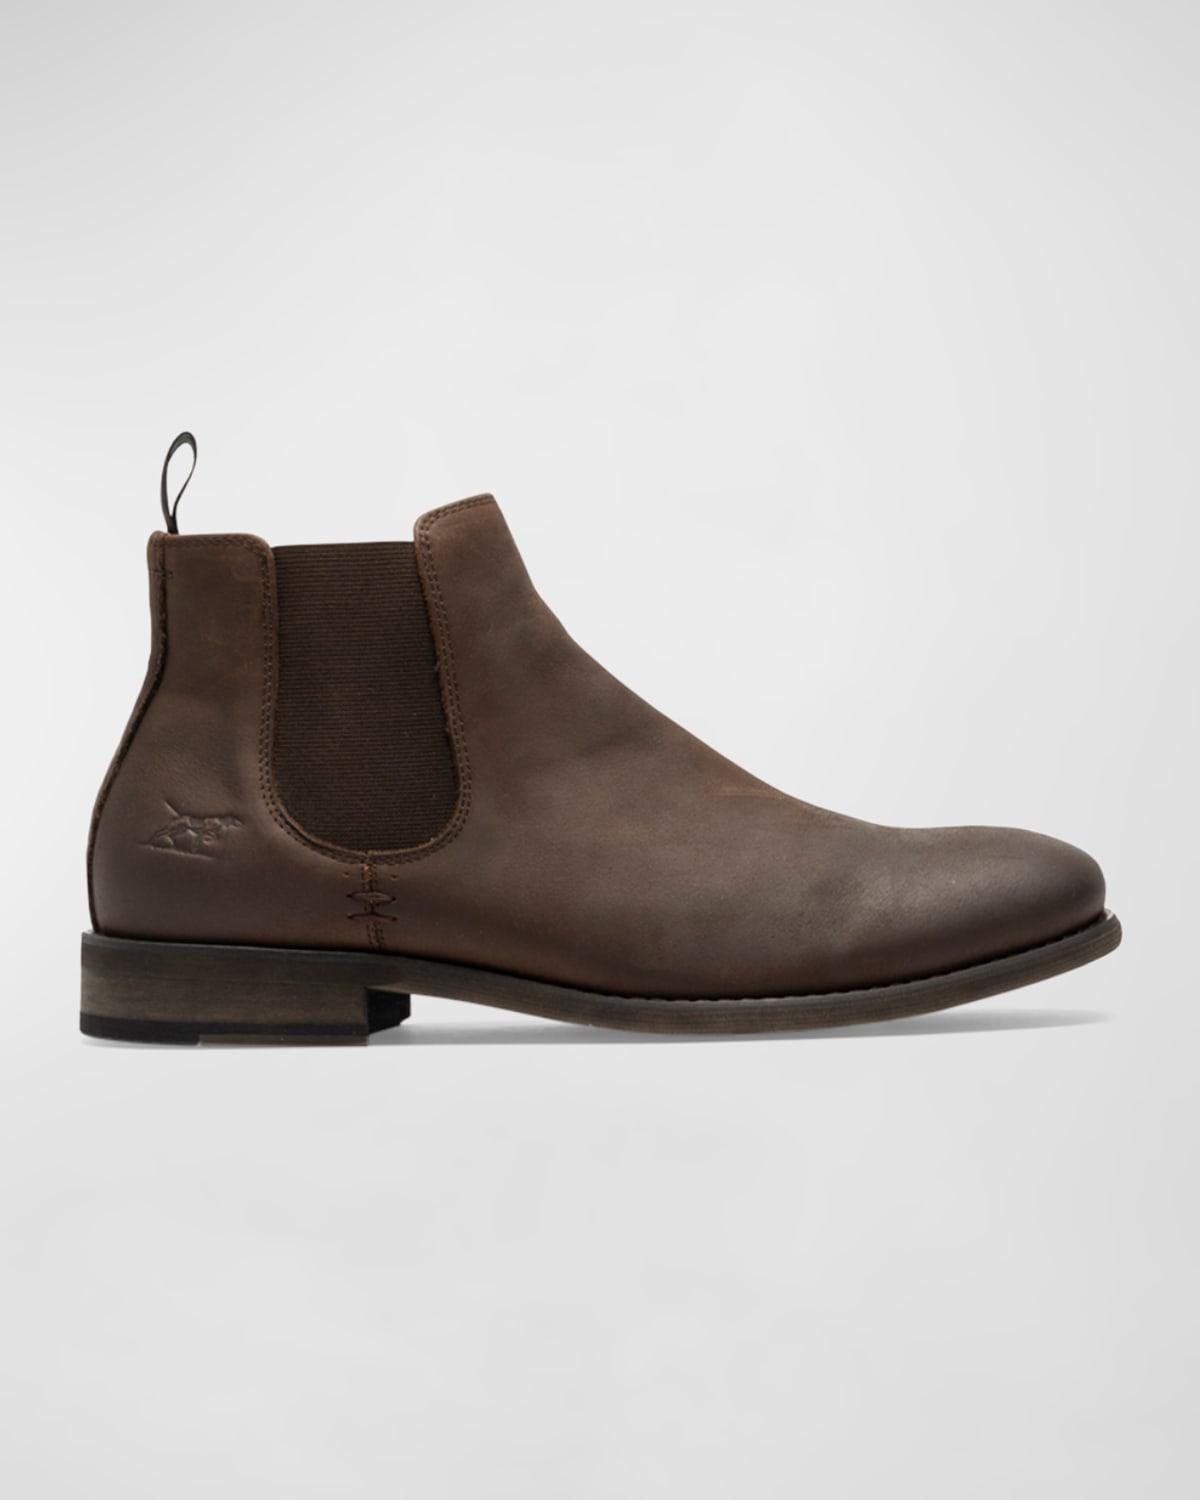 Men's Ealing Soft Leather Chelsea Boots Product Image